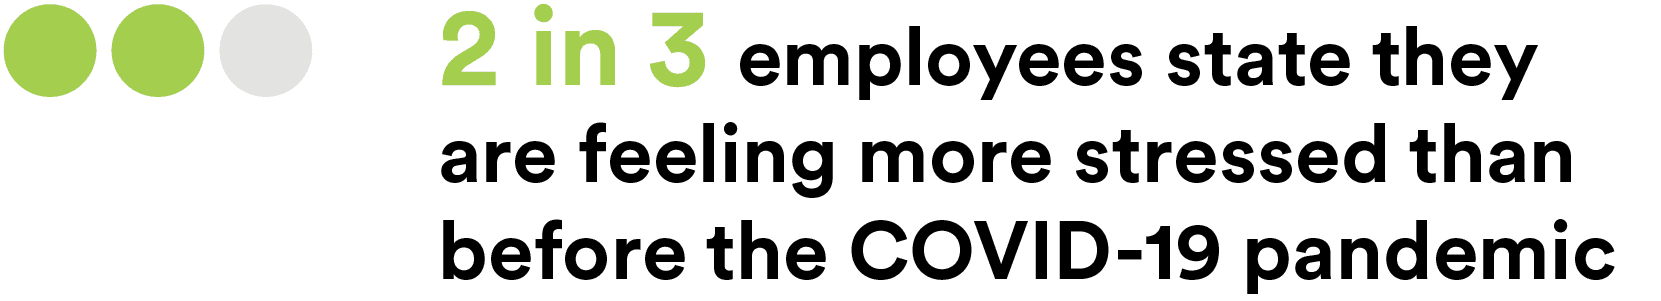 2 in 3 employees state they are more stressed infographic